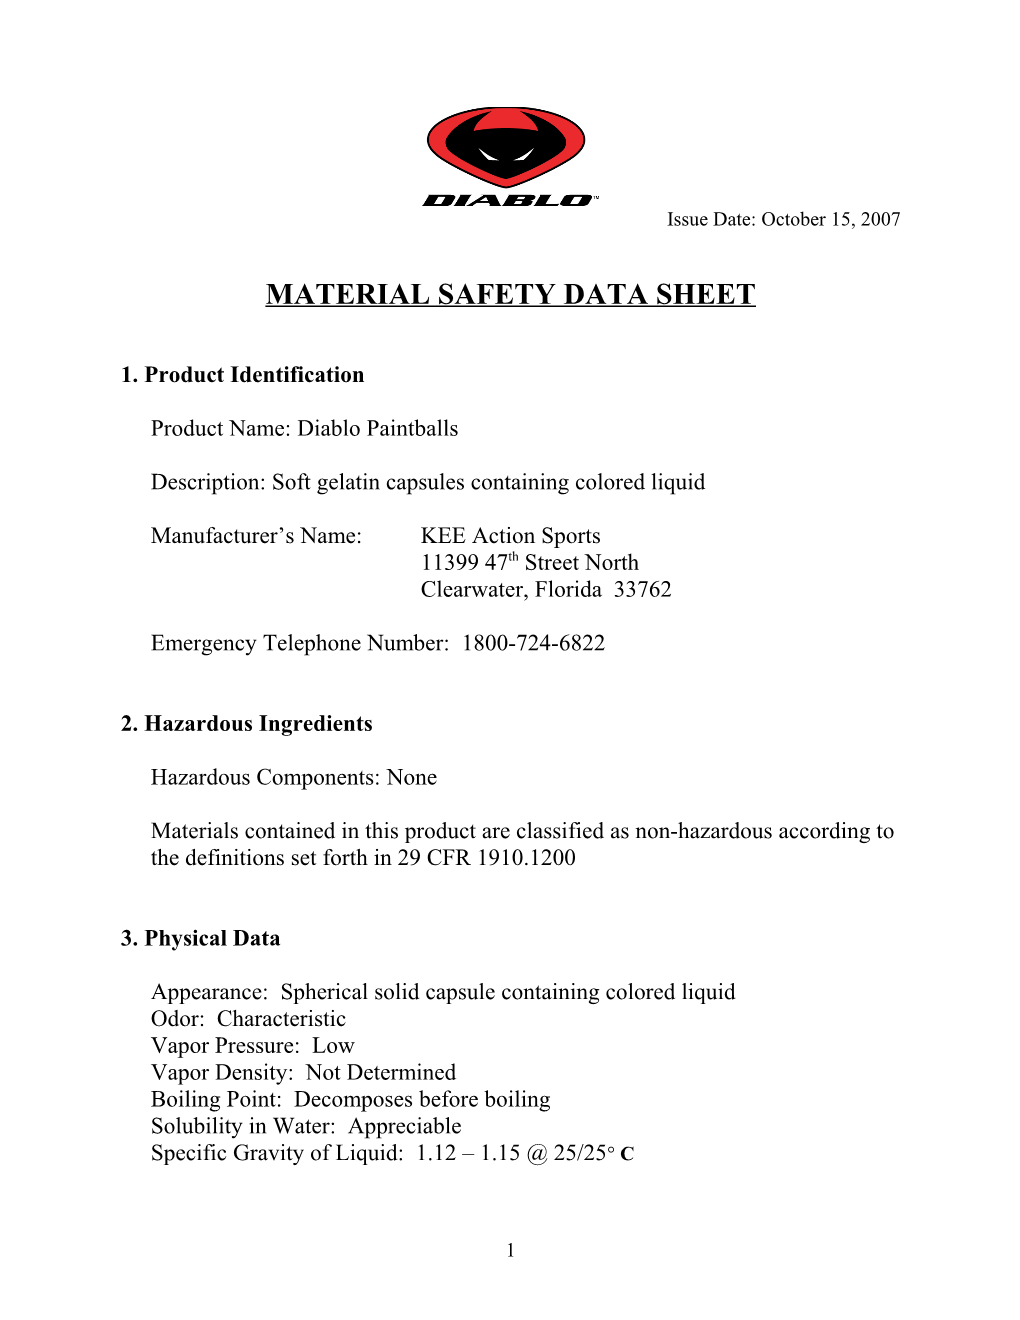 Material Safety Data Sheet s59